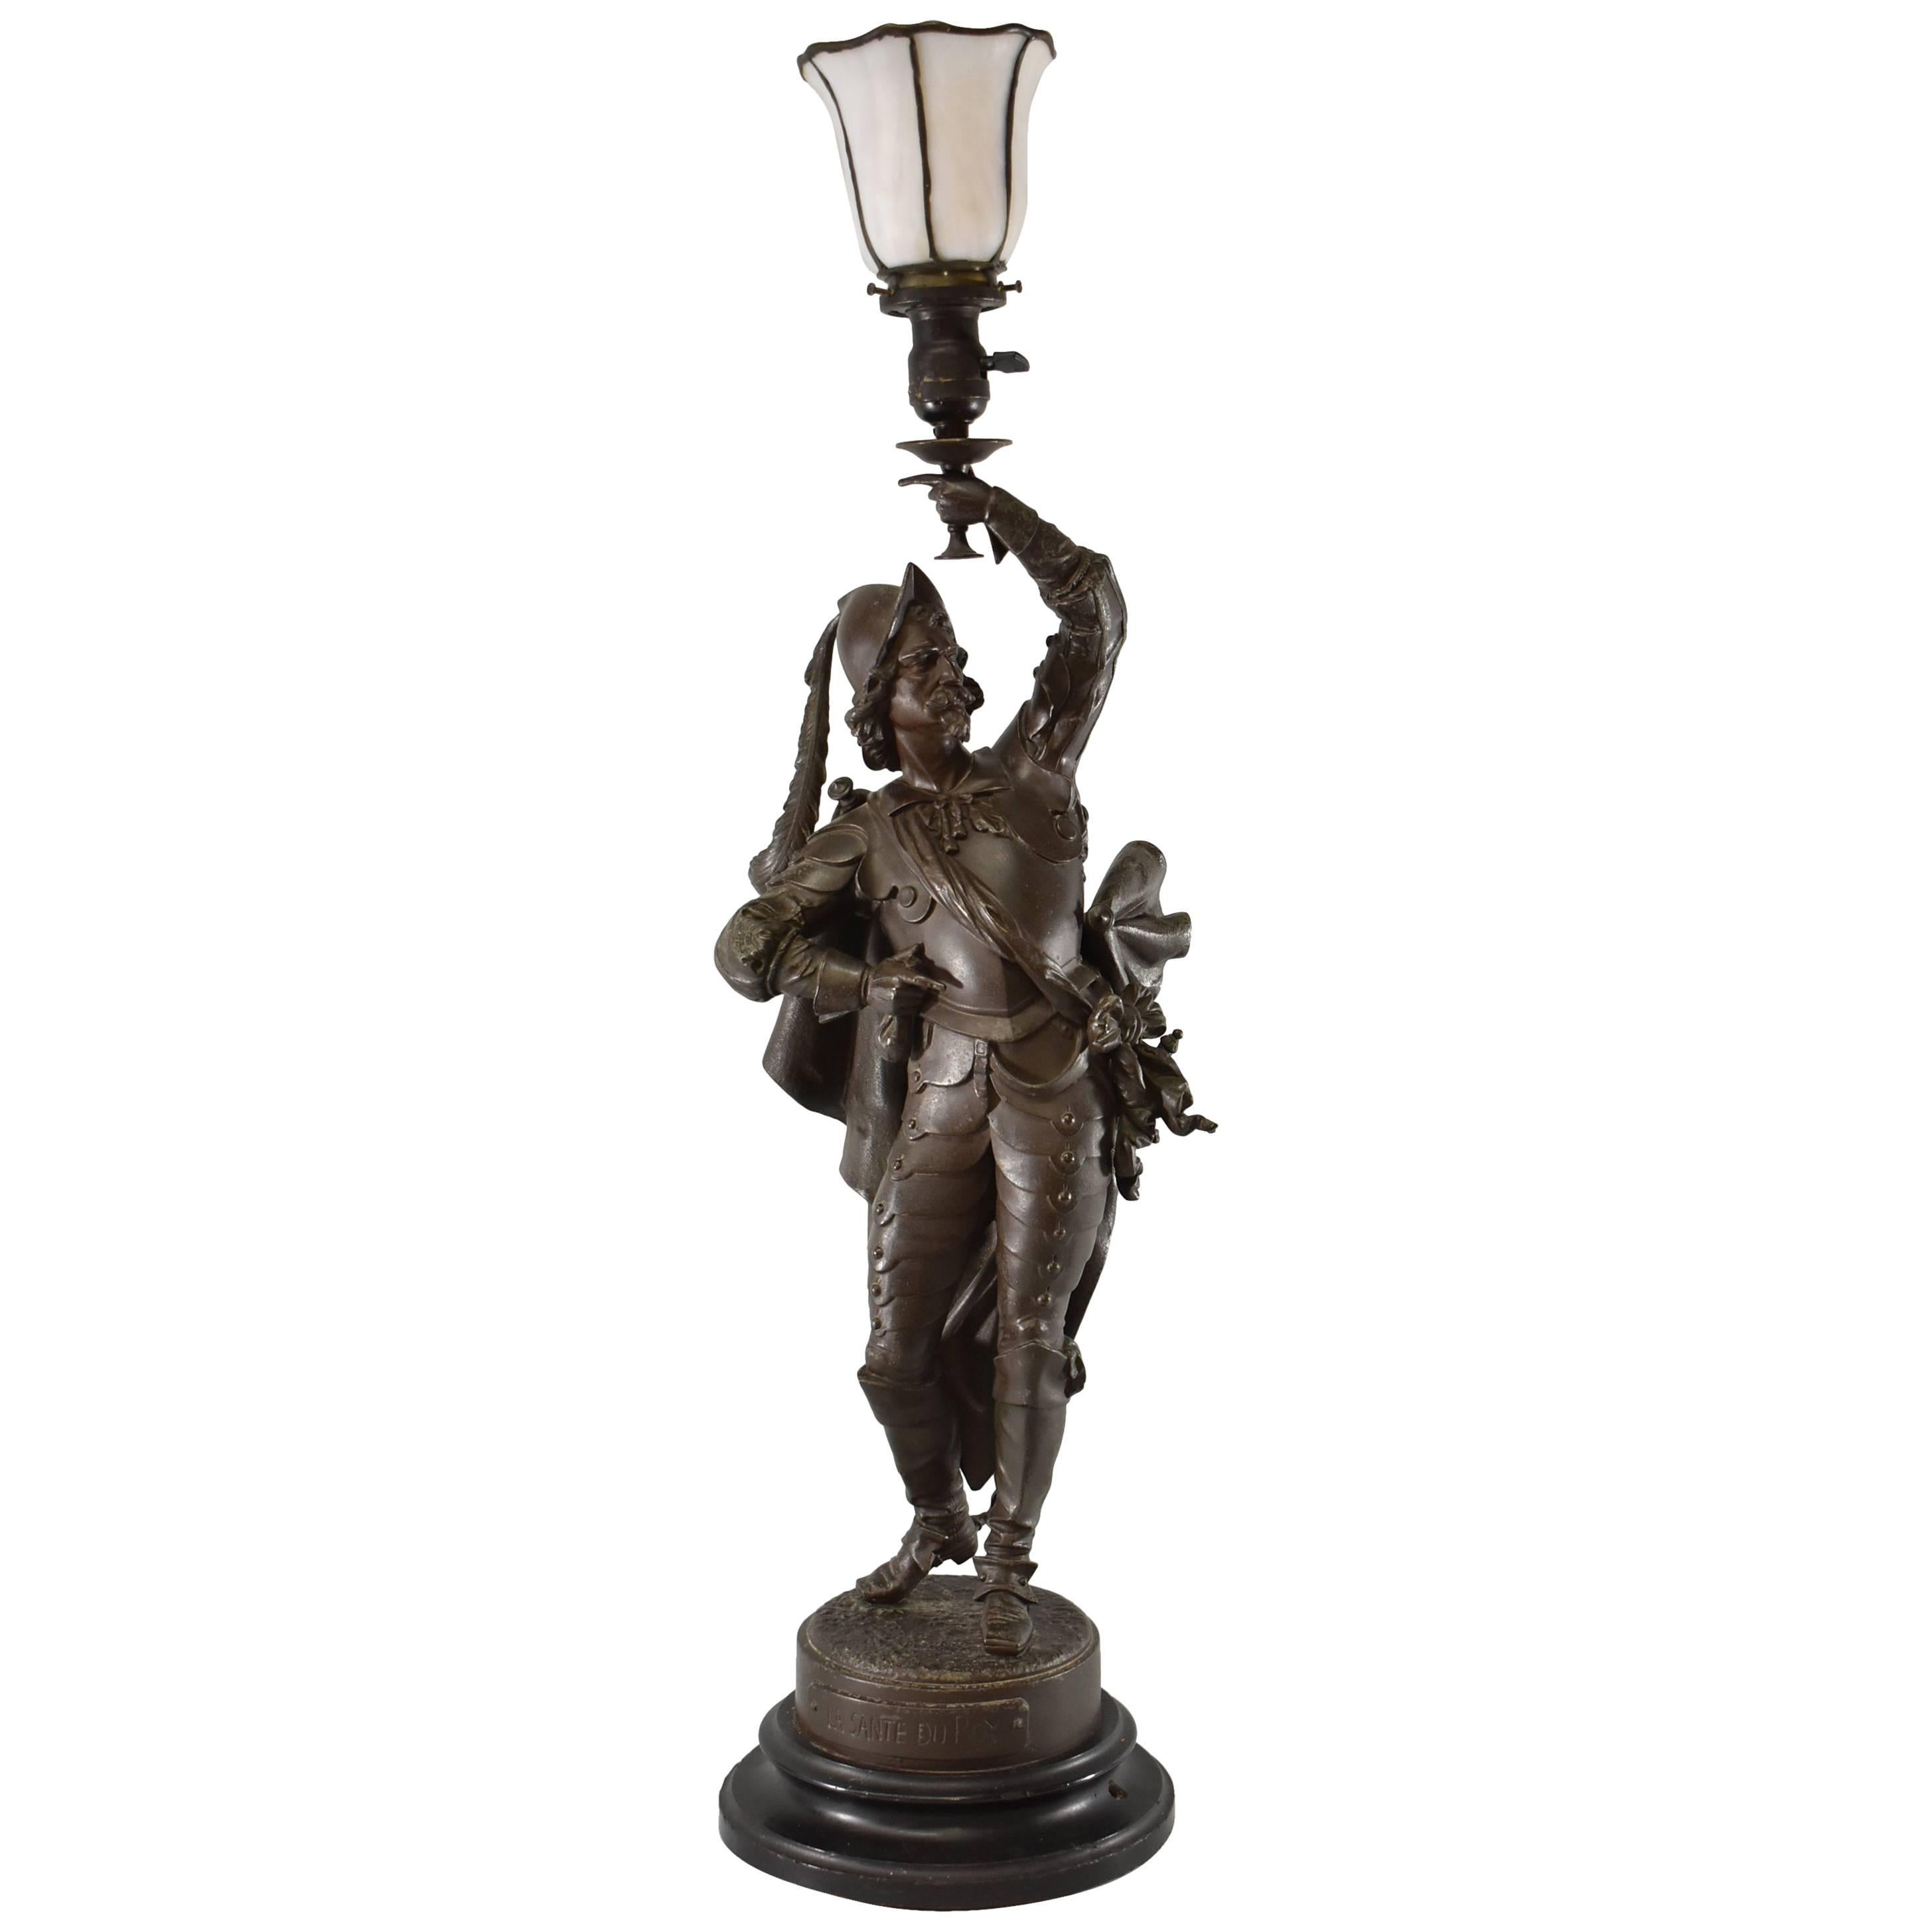 Antique French Musketeer Newel Post Lamp by Philippe Poitevin "La Sante du Roy"